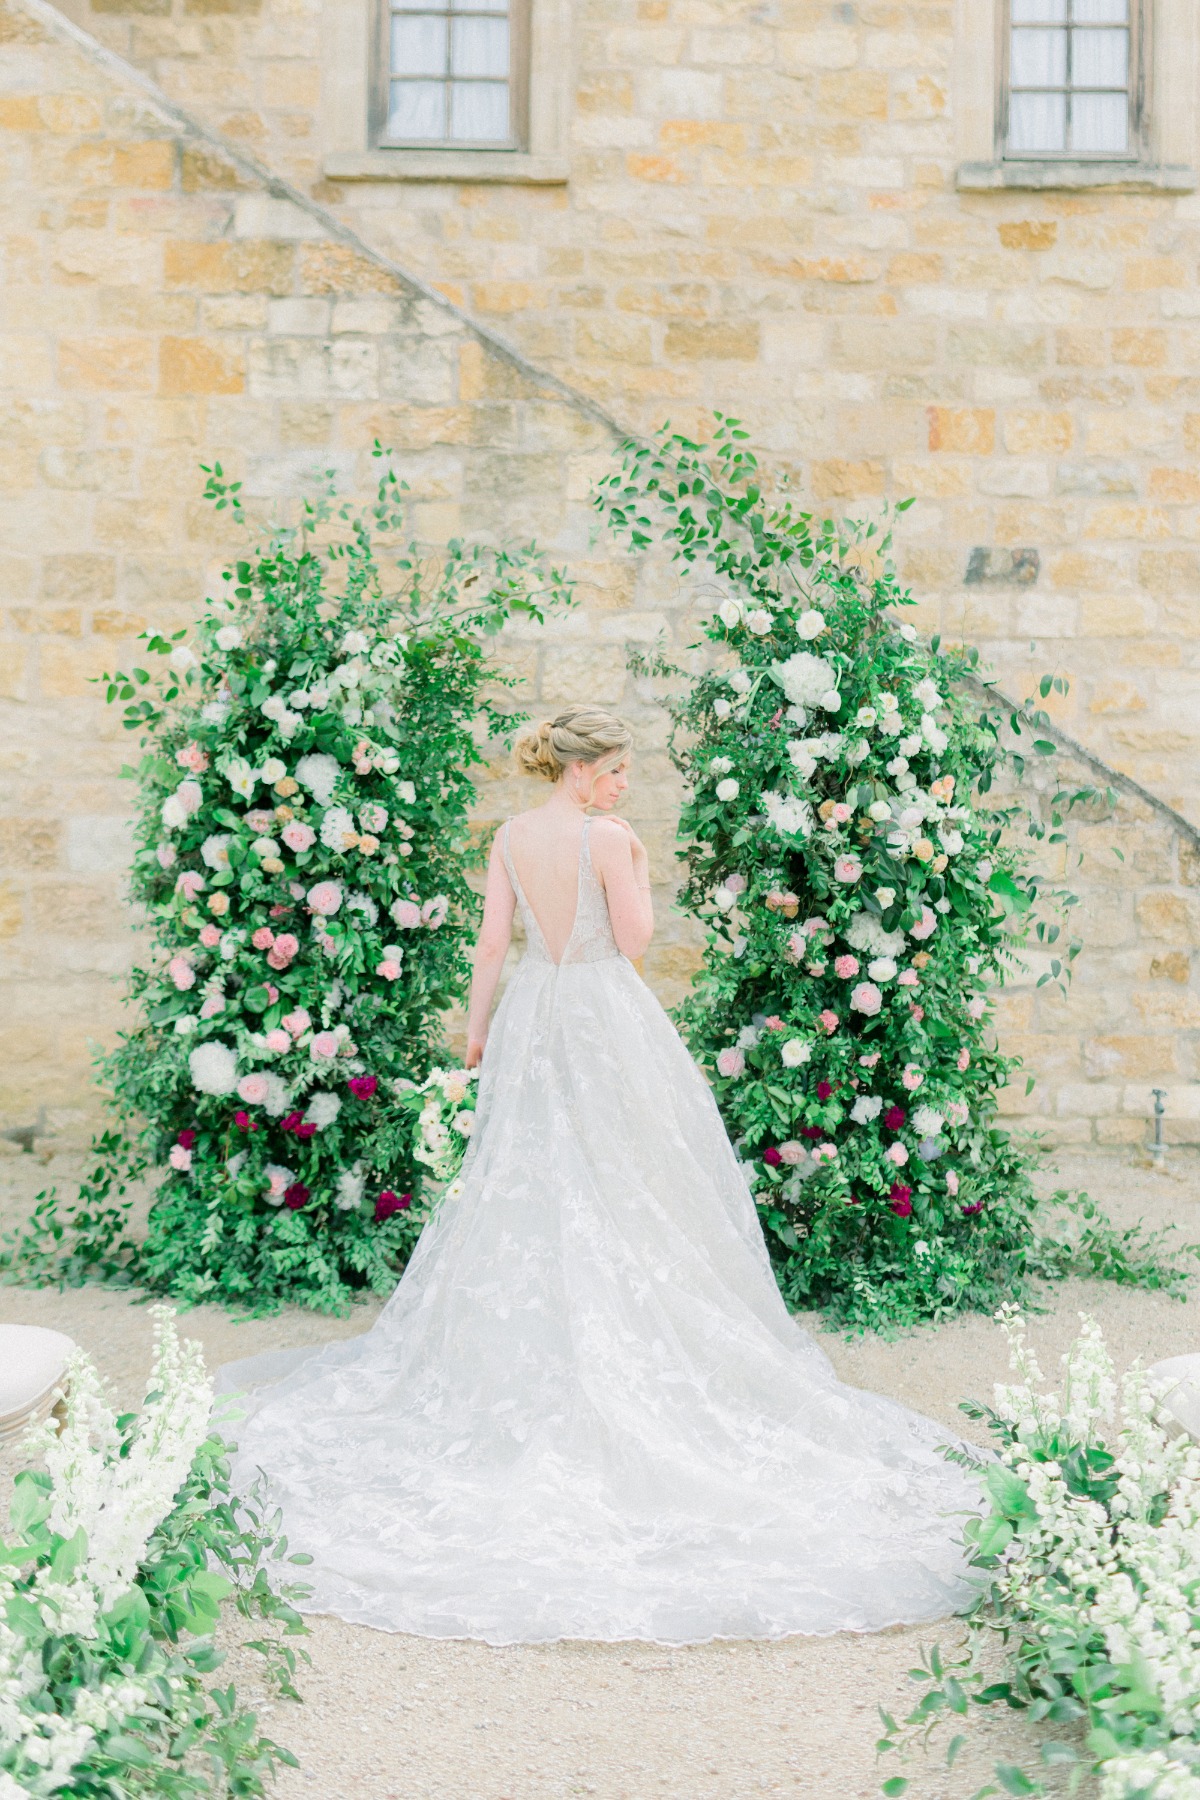 Hailey Paige Bridal wedding gown in front of organic floral backdro[